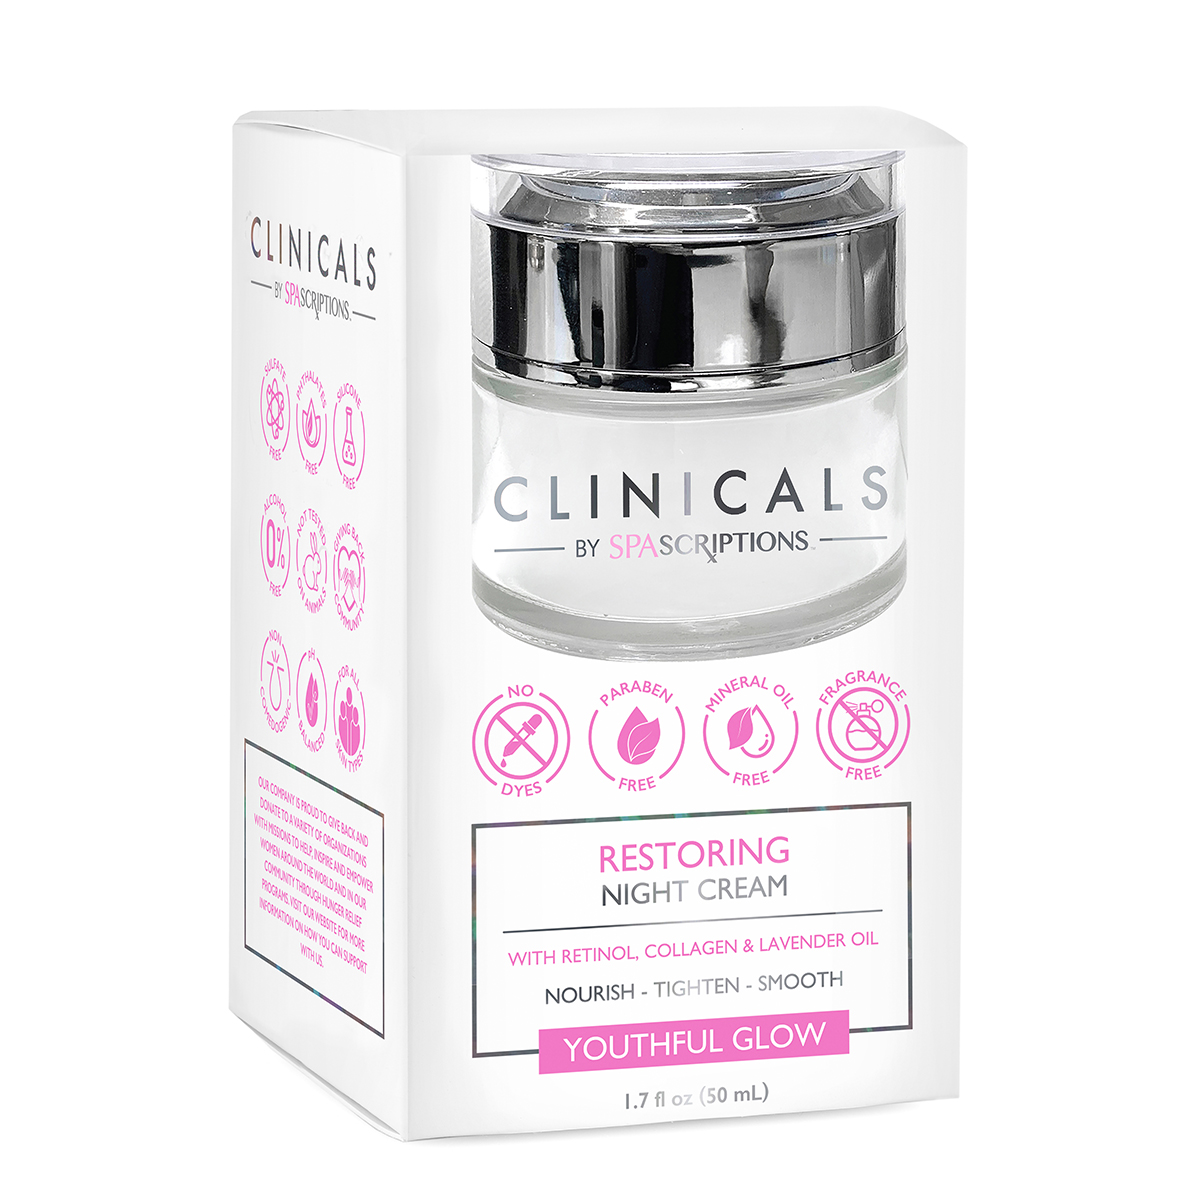 Clinicals By Spascriptions Restoring Night Cream